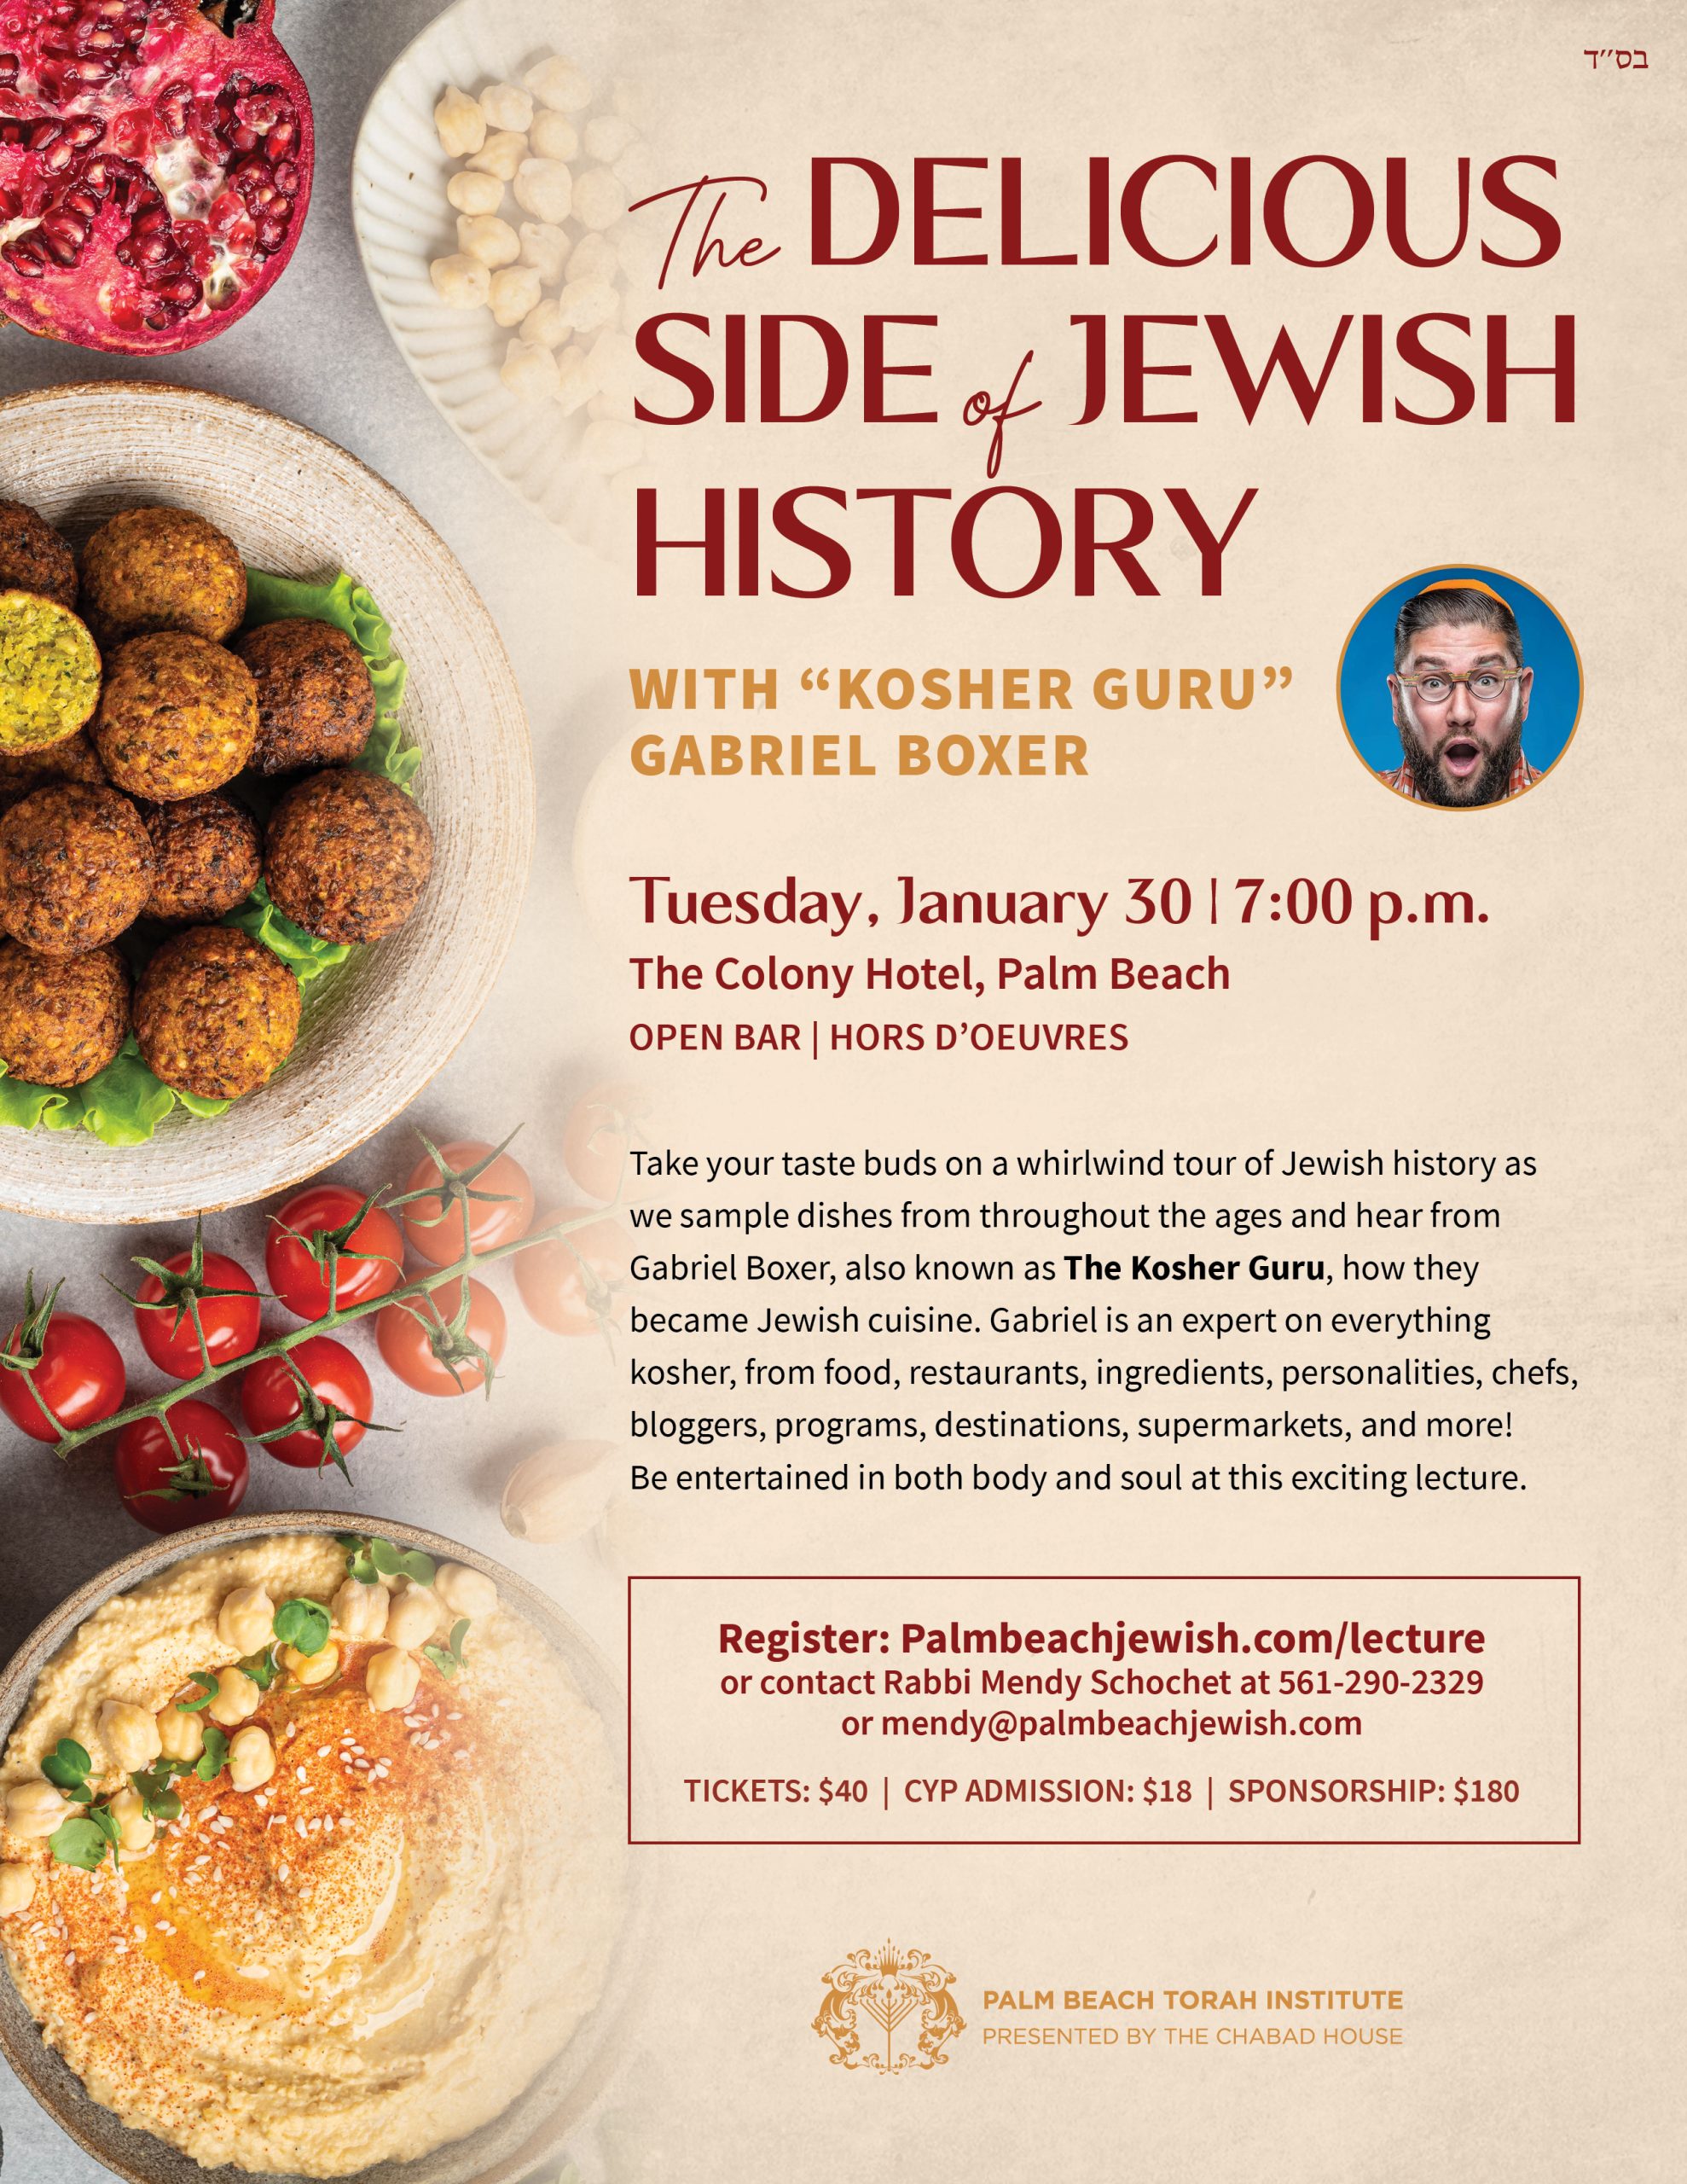 THE DELICIOUS SIDE OF JEWISH HISTORY WITH GABRIEL BOXER – Jewish